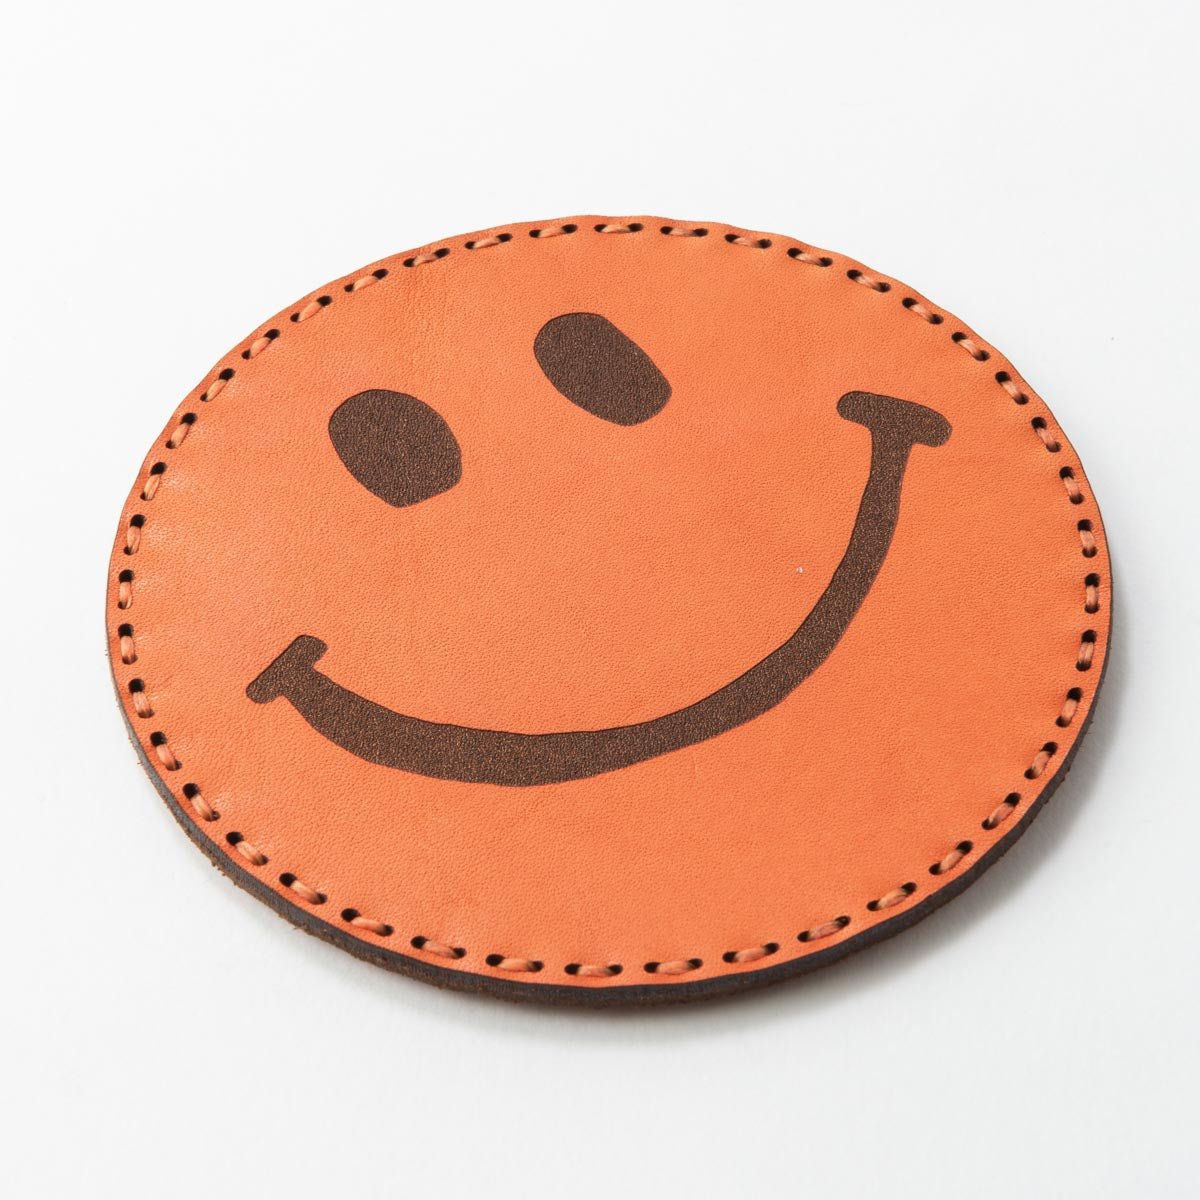 Fire-King レザーコースター SMILEY FACE オレンジ by OJAGA DESIGN